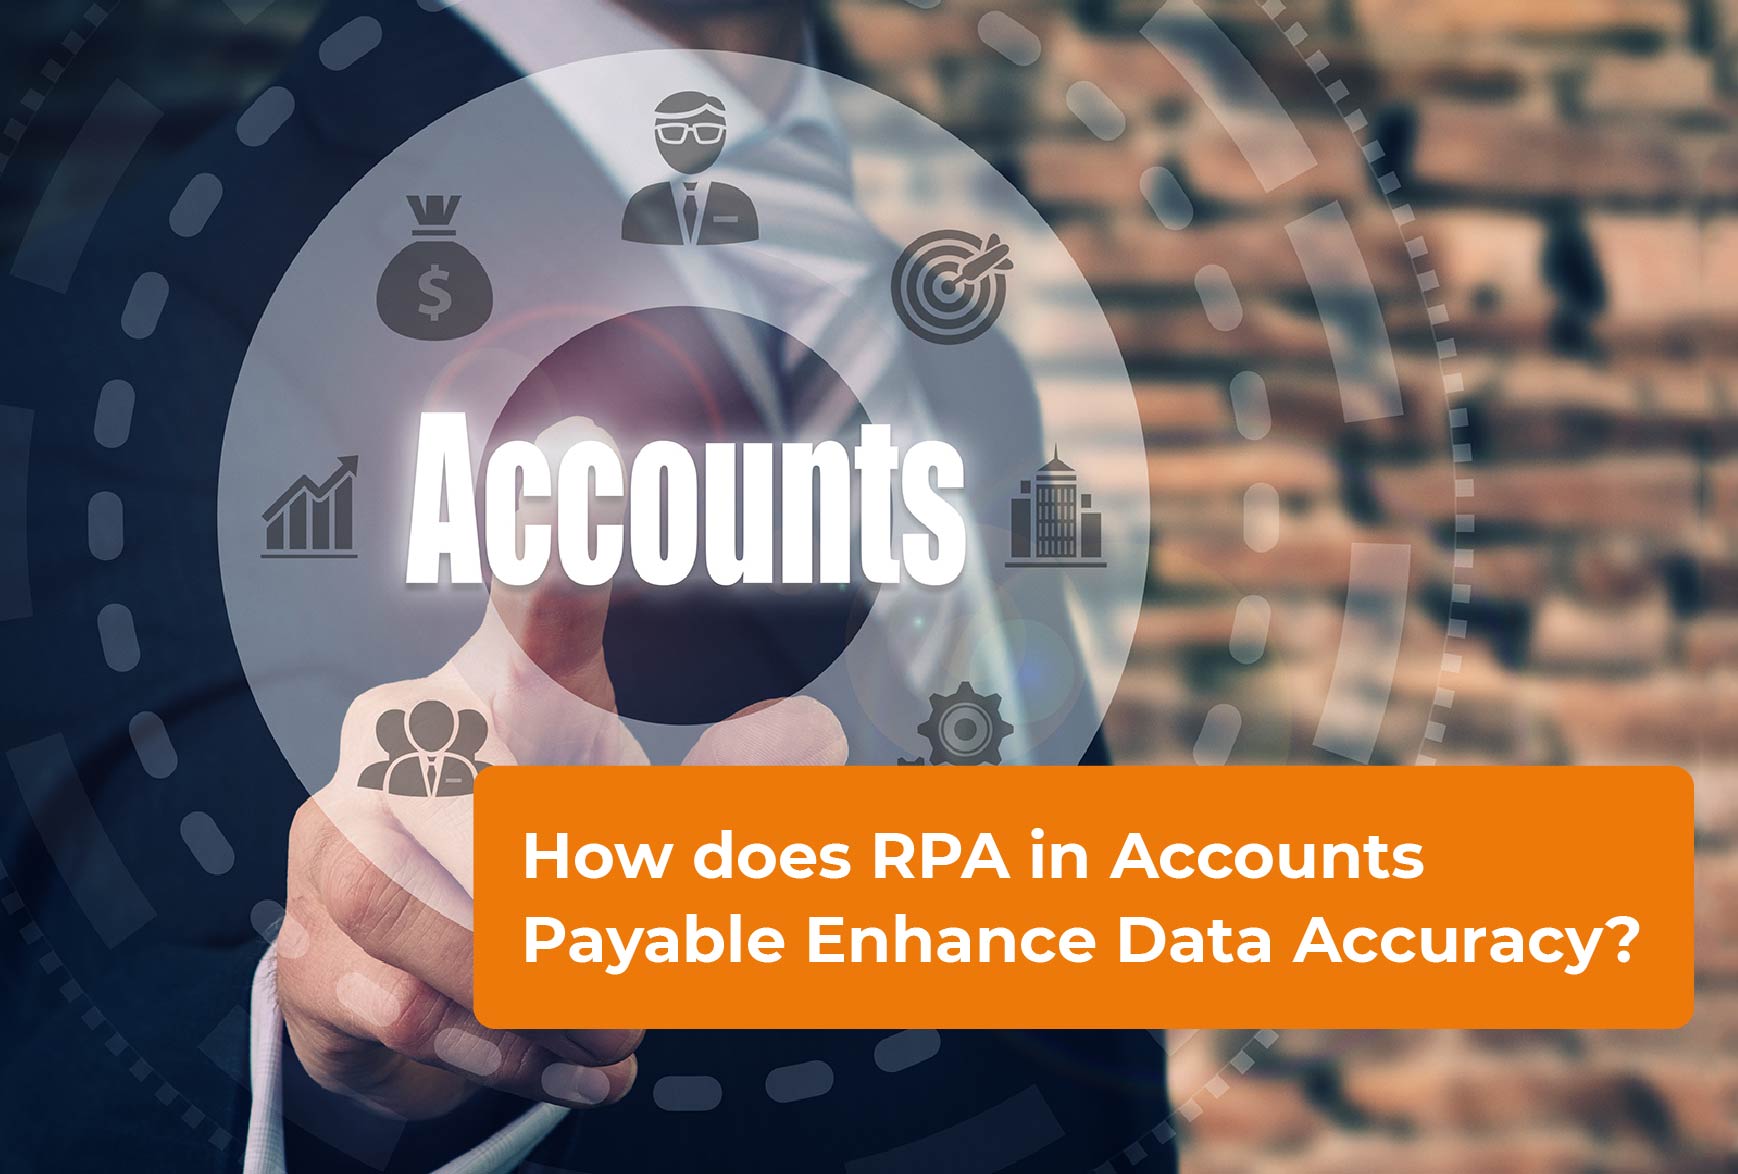 How does RPA in Accounts Payable Enhance Data Accuracy?